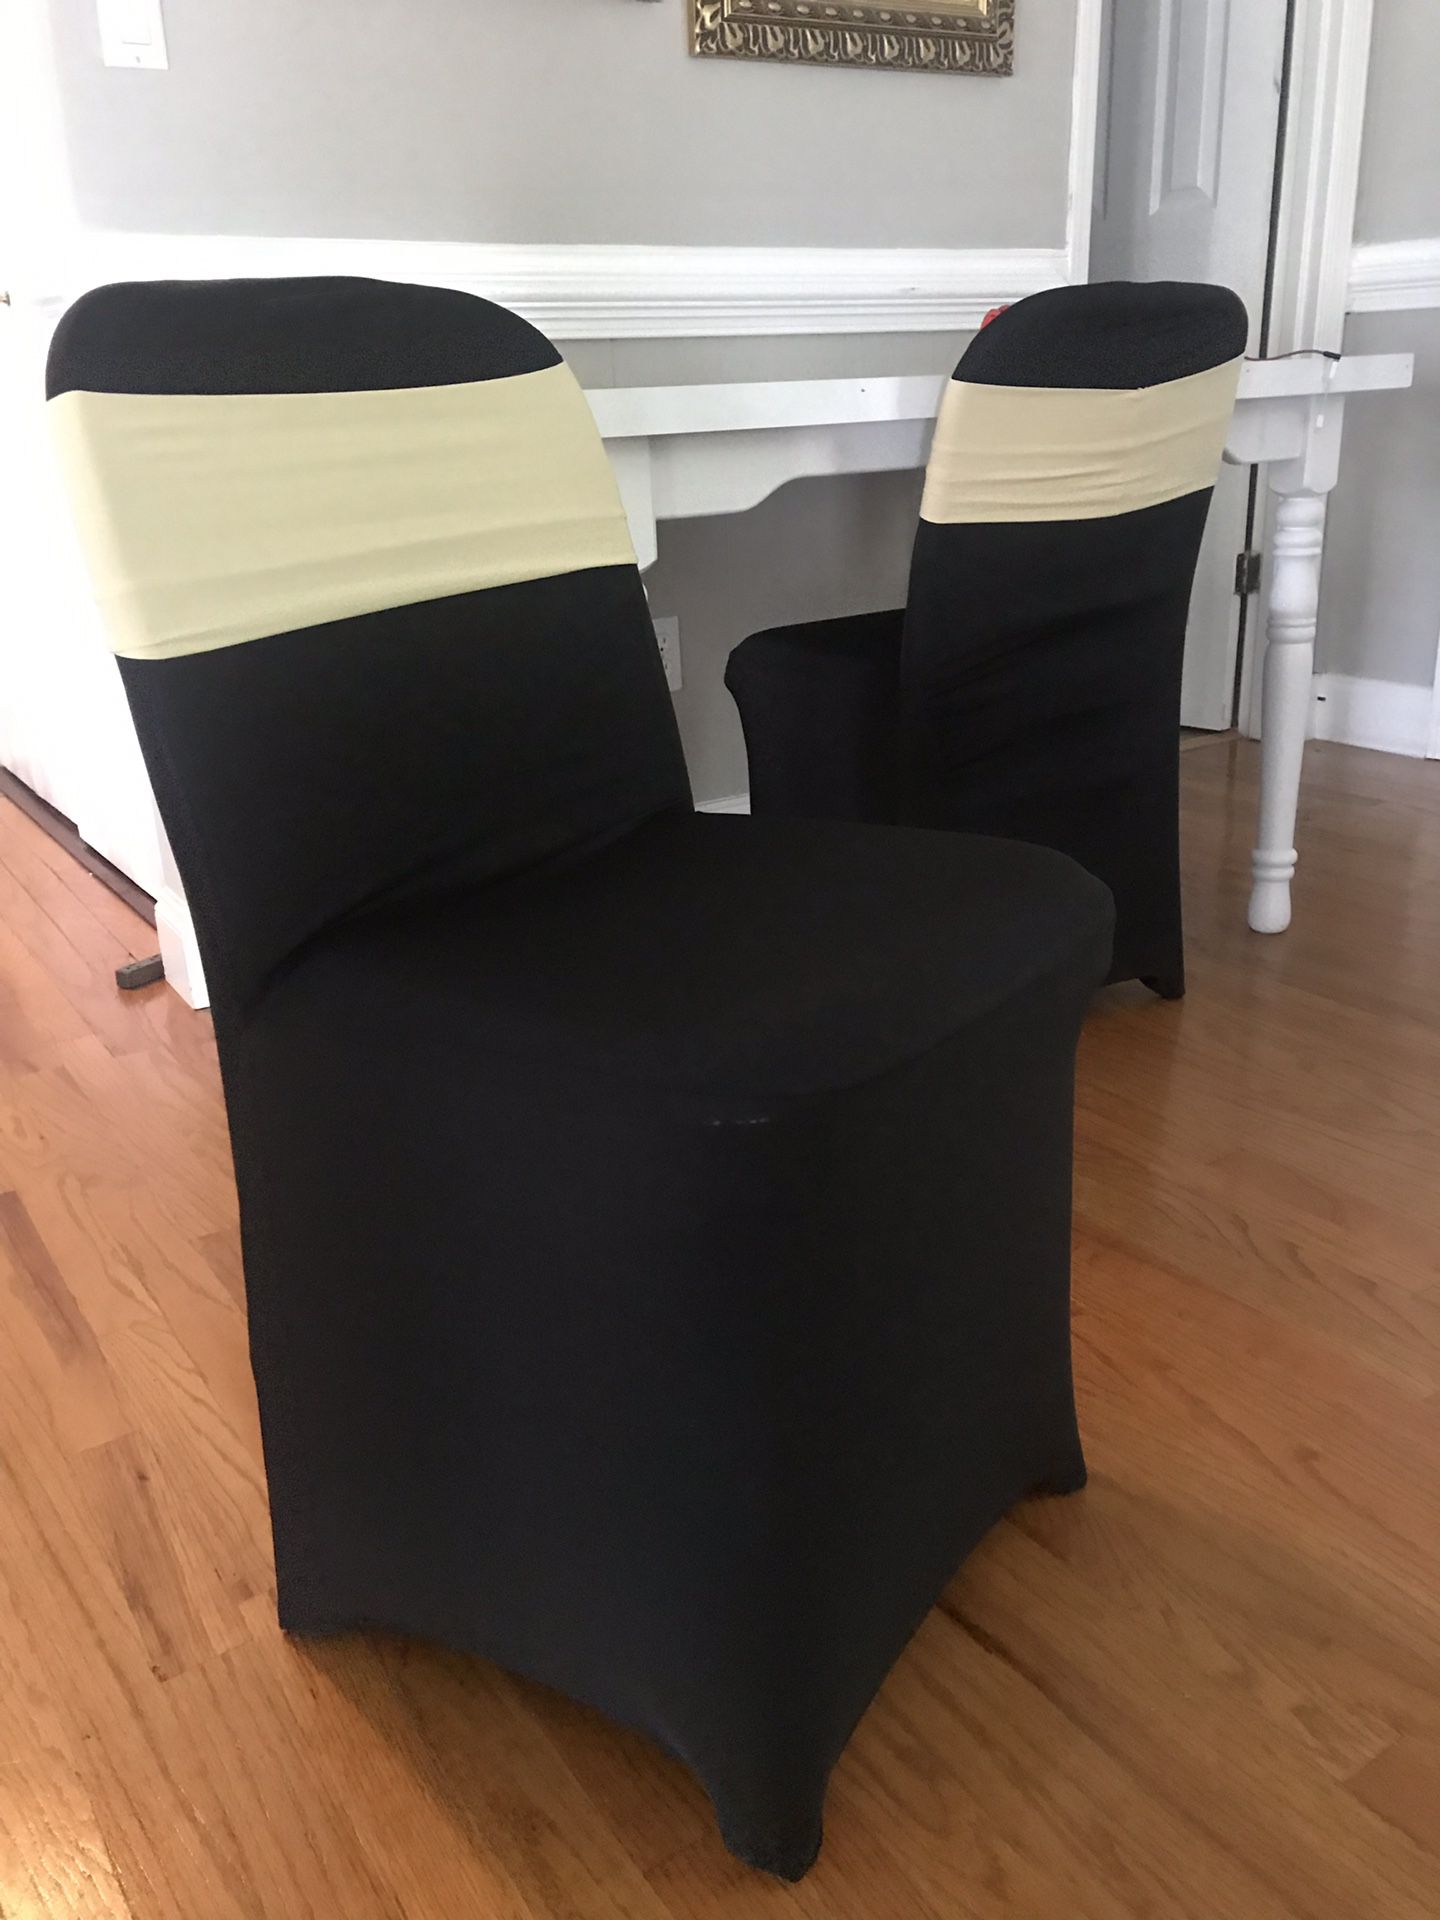 12 black chairs covers with beige